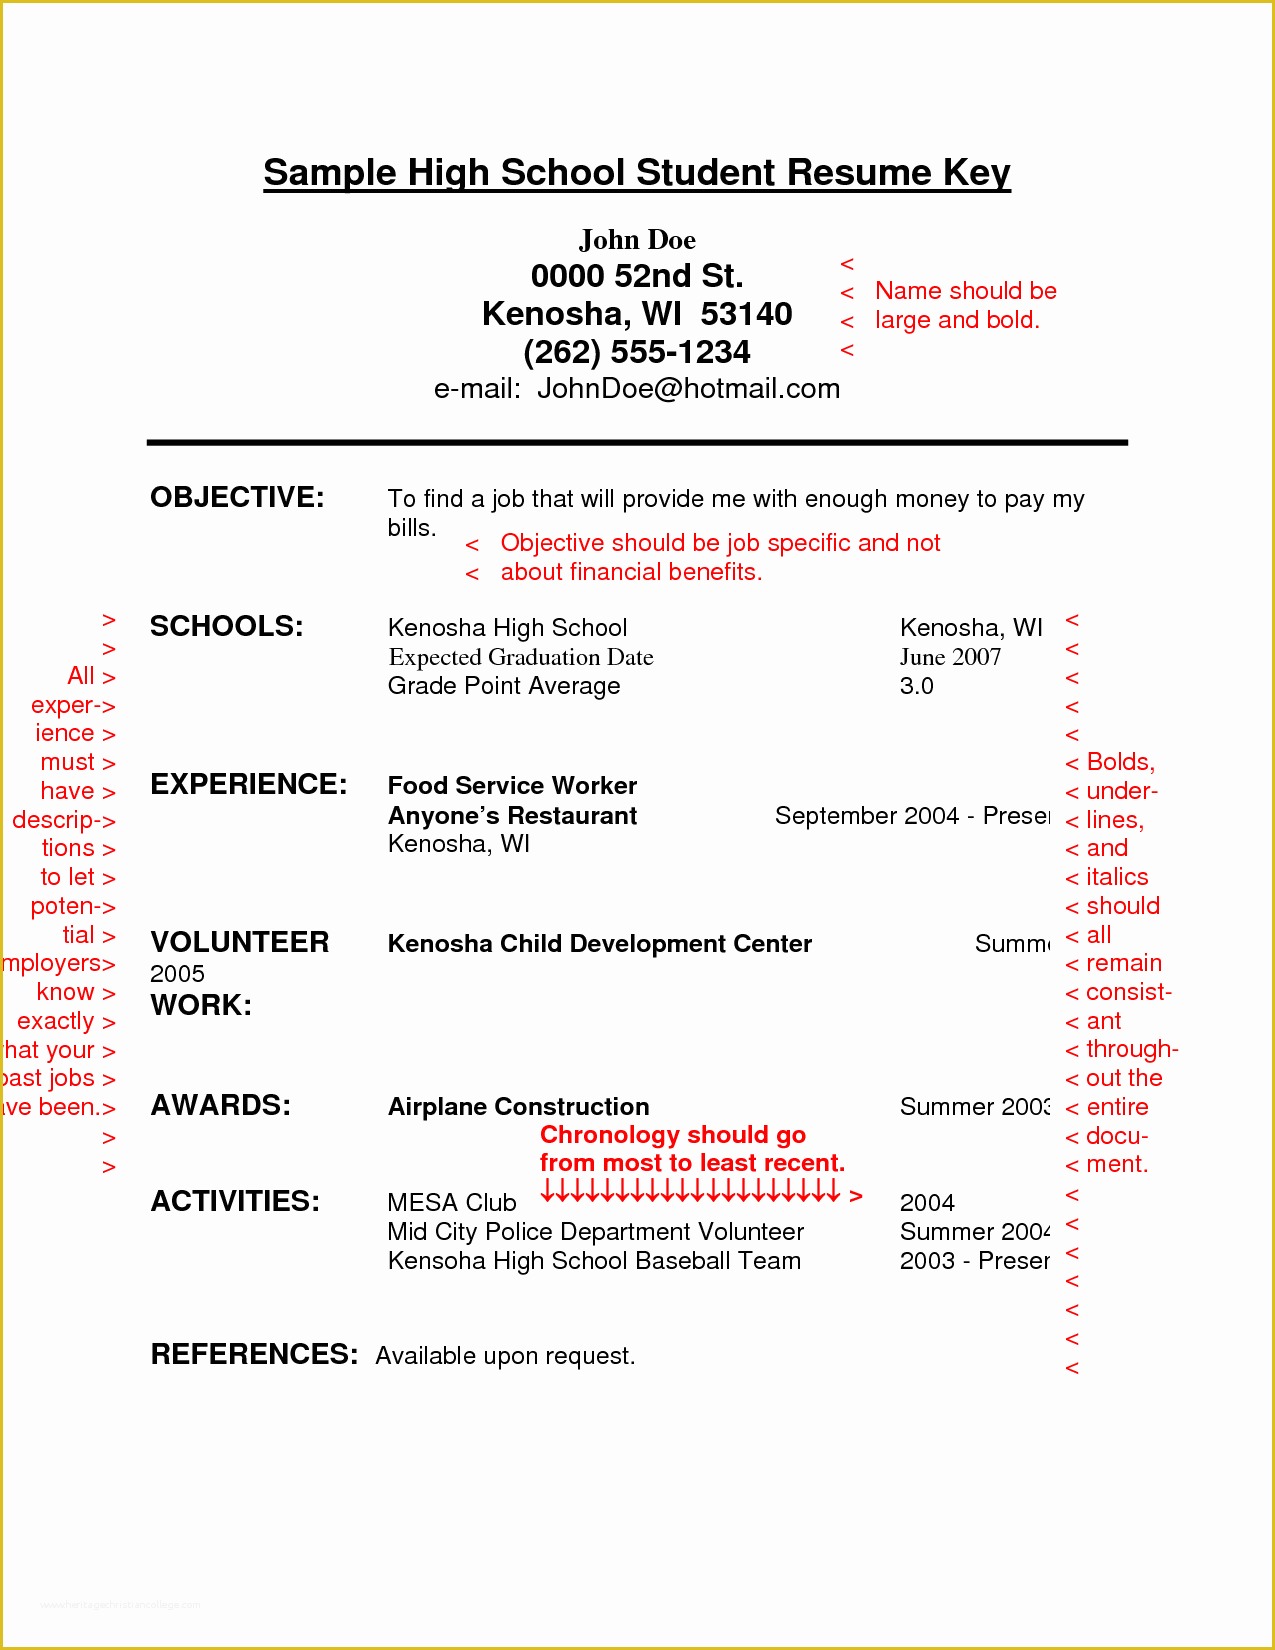 Free Resume Templates for Highschool Students with No Work Experience Of Resume Sample for High School Students with No Experience